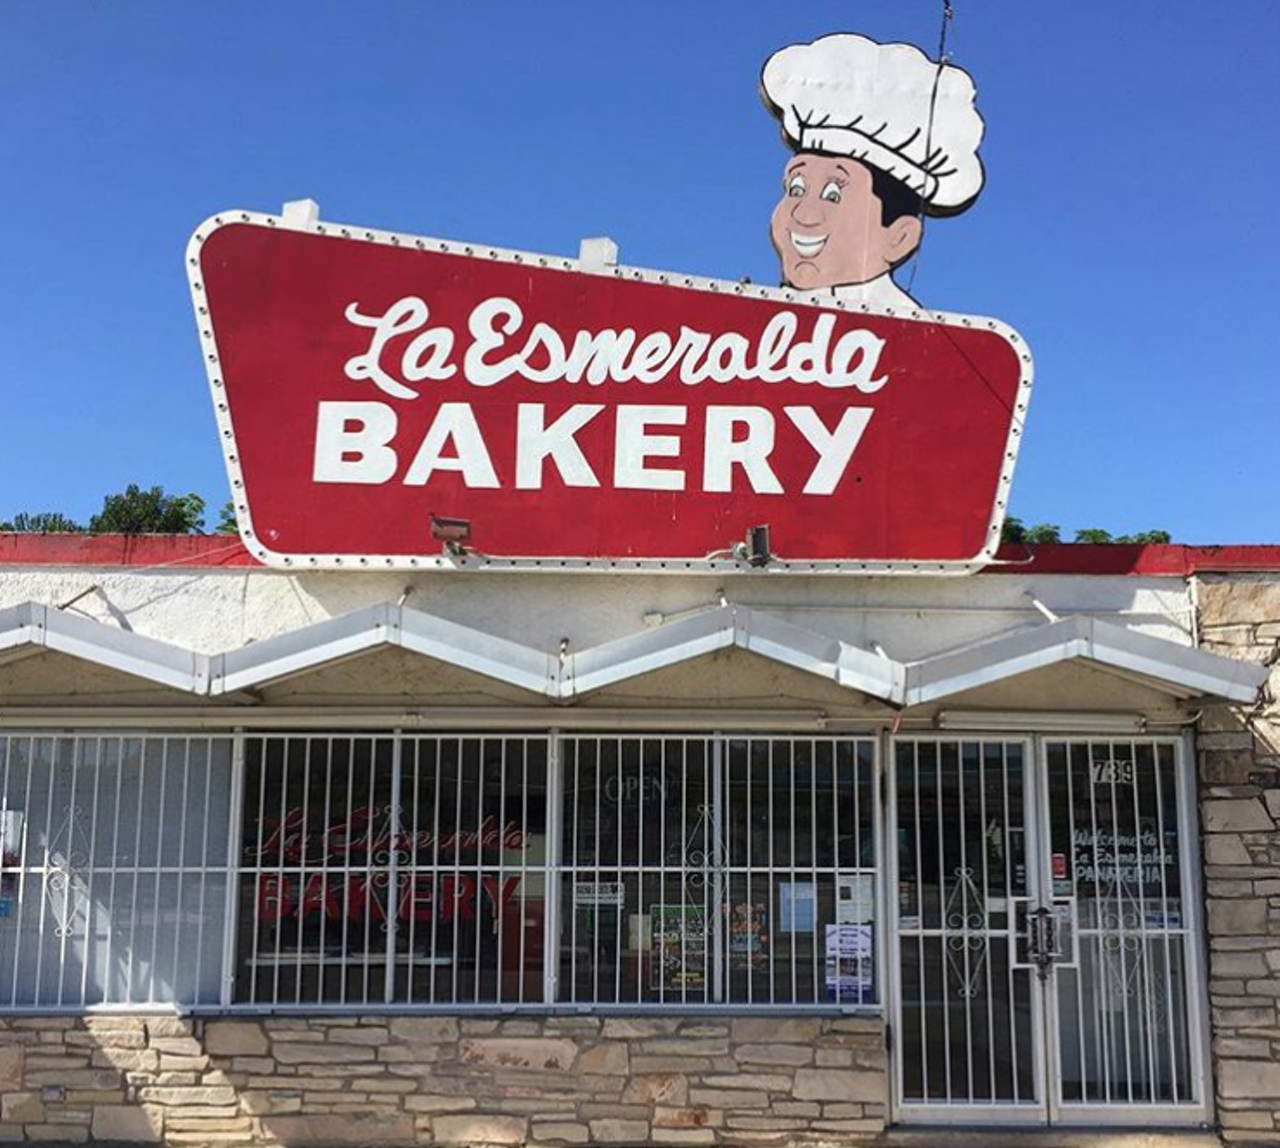 La Esmeralda Bakery
739 New Laredo Hwy, (210) 922-3063
Head on over to New Laredo Highway for some sweet as heck pan dulce from La Esmeralda, so long as your order includes all the buñuelos you can handle.
Photo via Instagram / christinafrasier